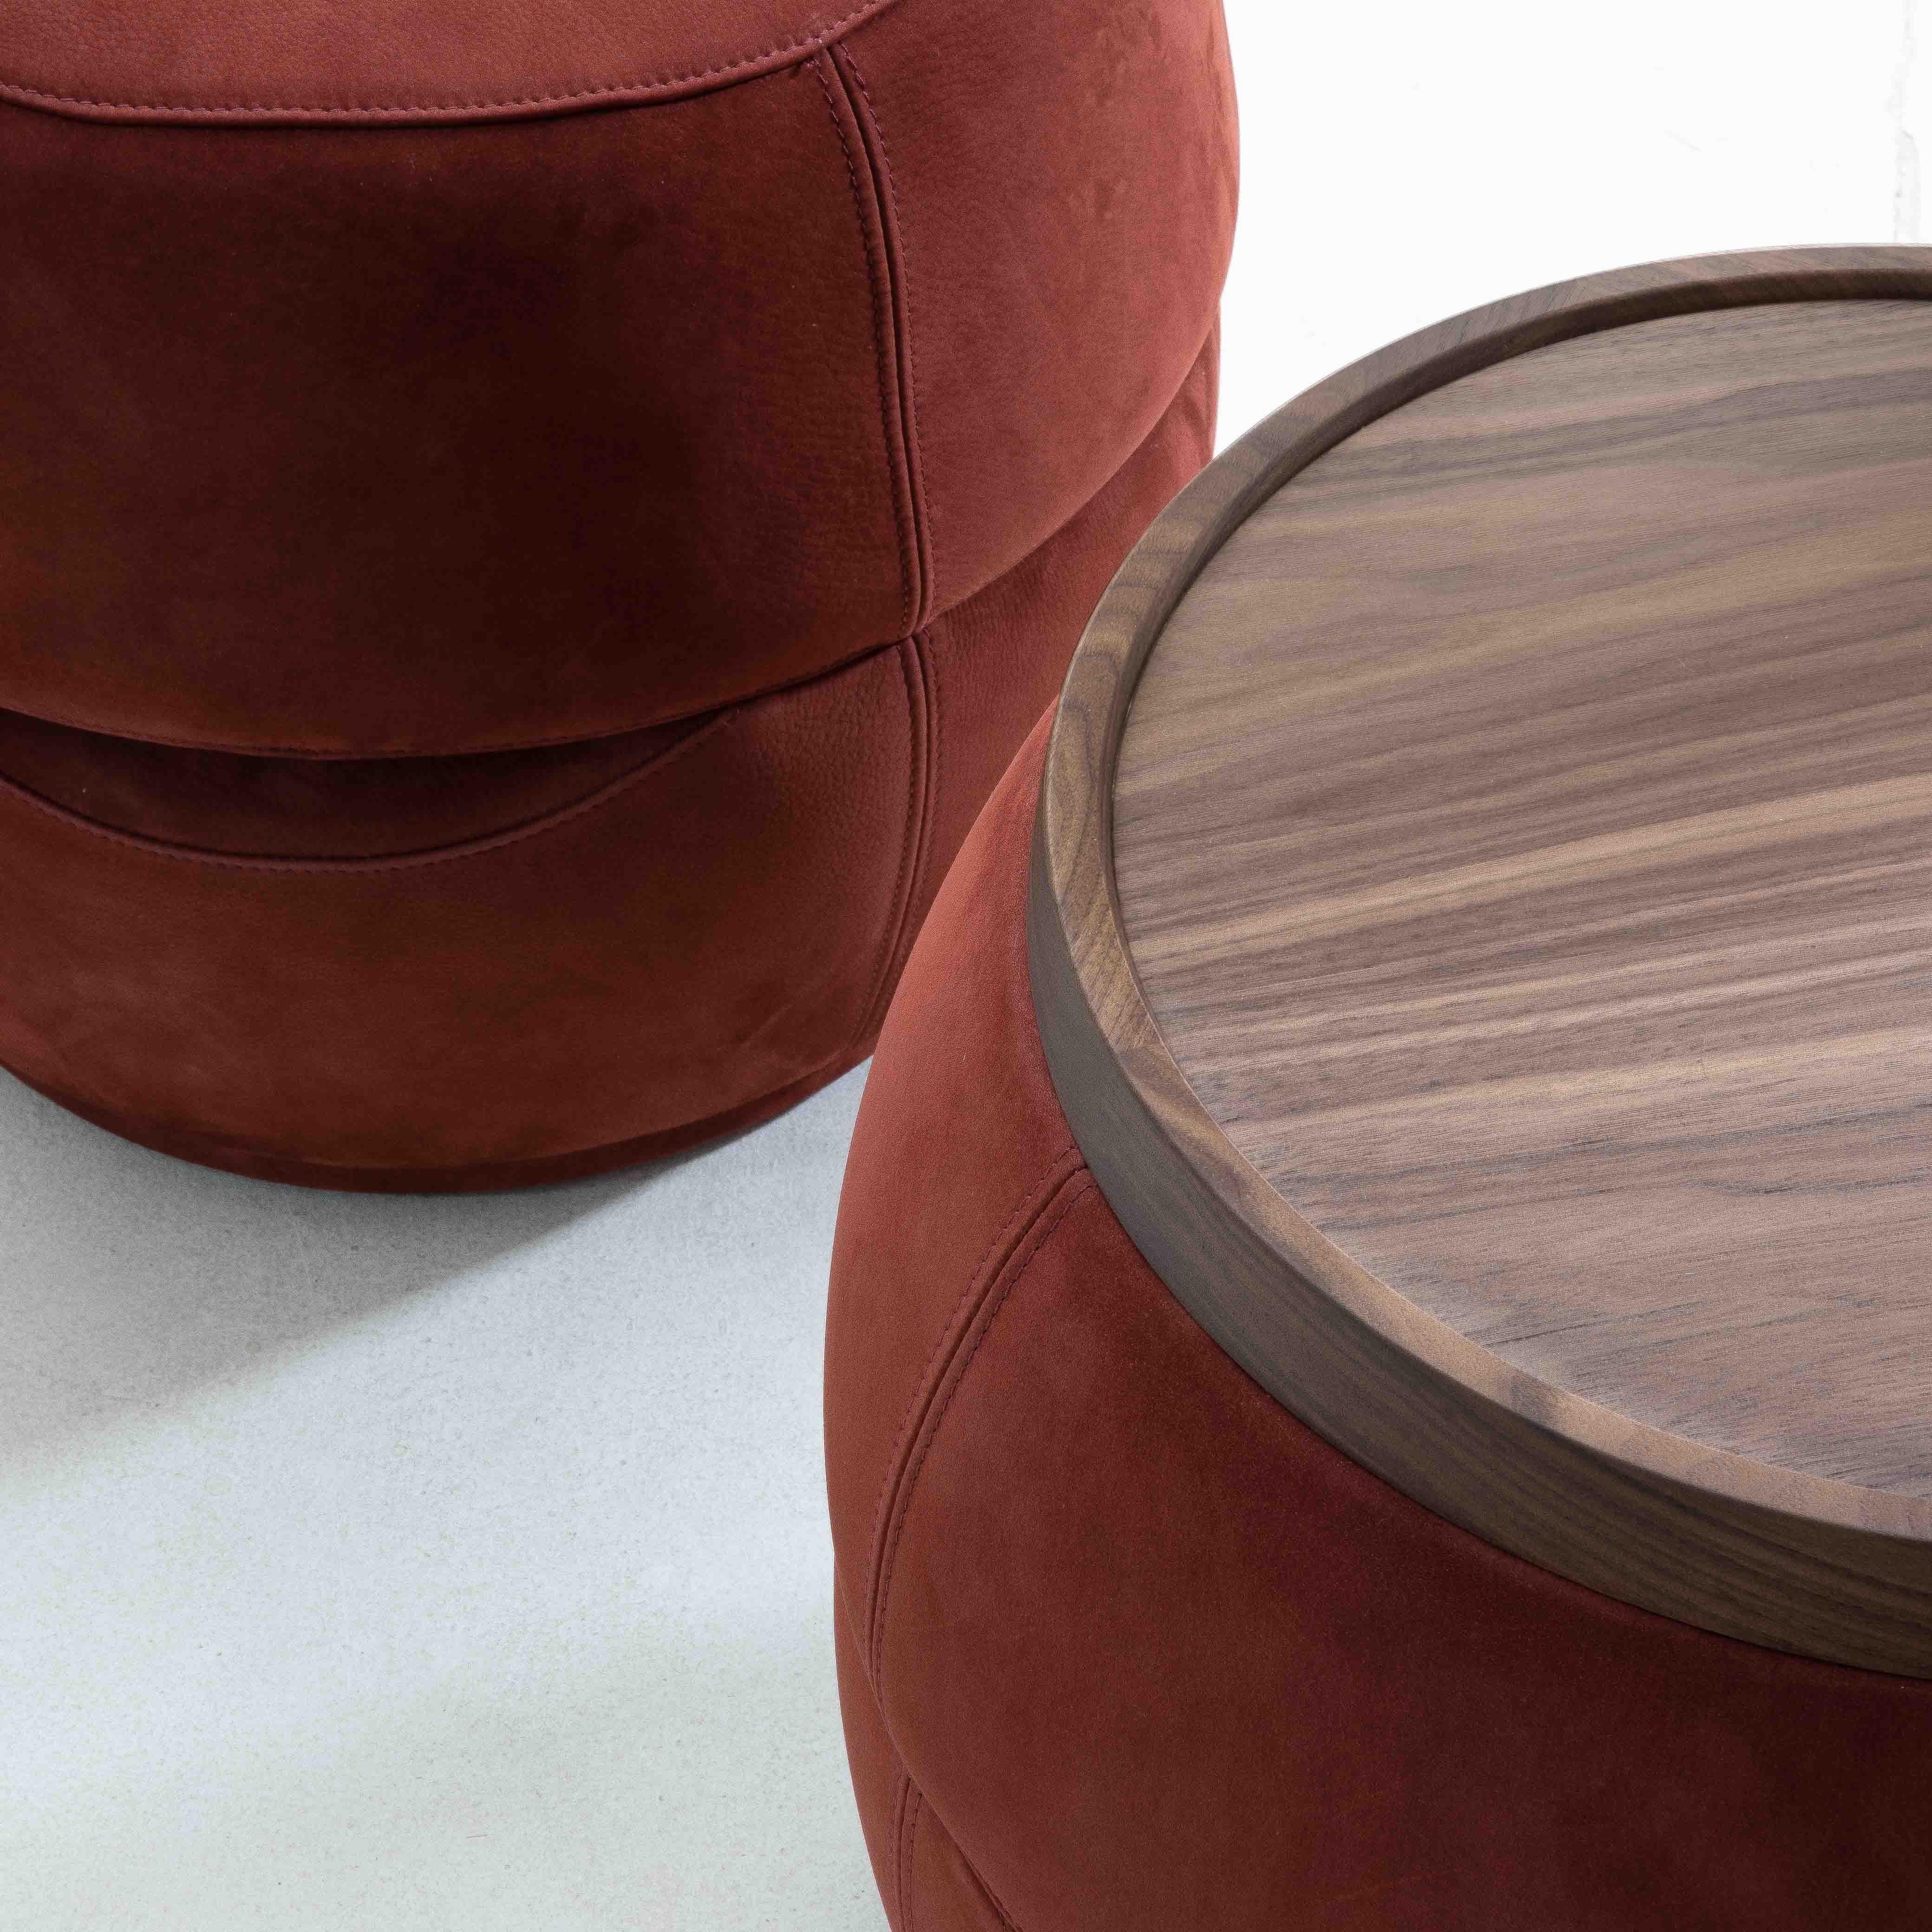 Barrell Luxury Accent Table is inspired by the shapes of Tuscan wine barrels. Its simple and solid shapes and its modern design, make this piece a perfect example of Italian manufacturing. Thanks to these features, Barrell is ideal to decorate